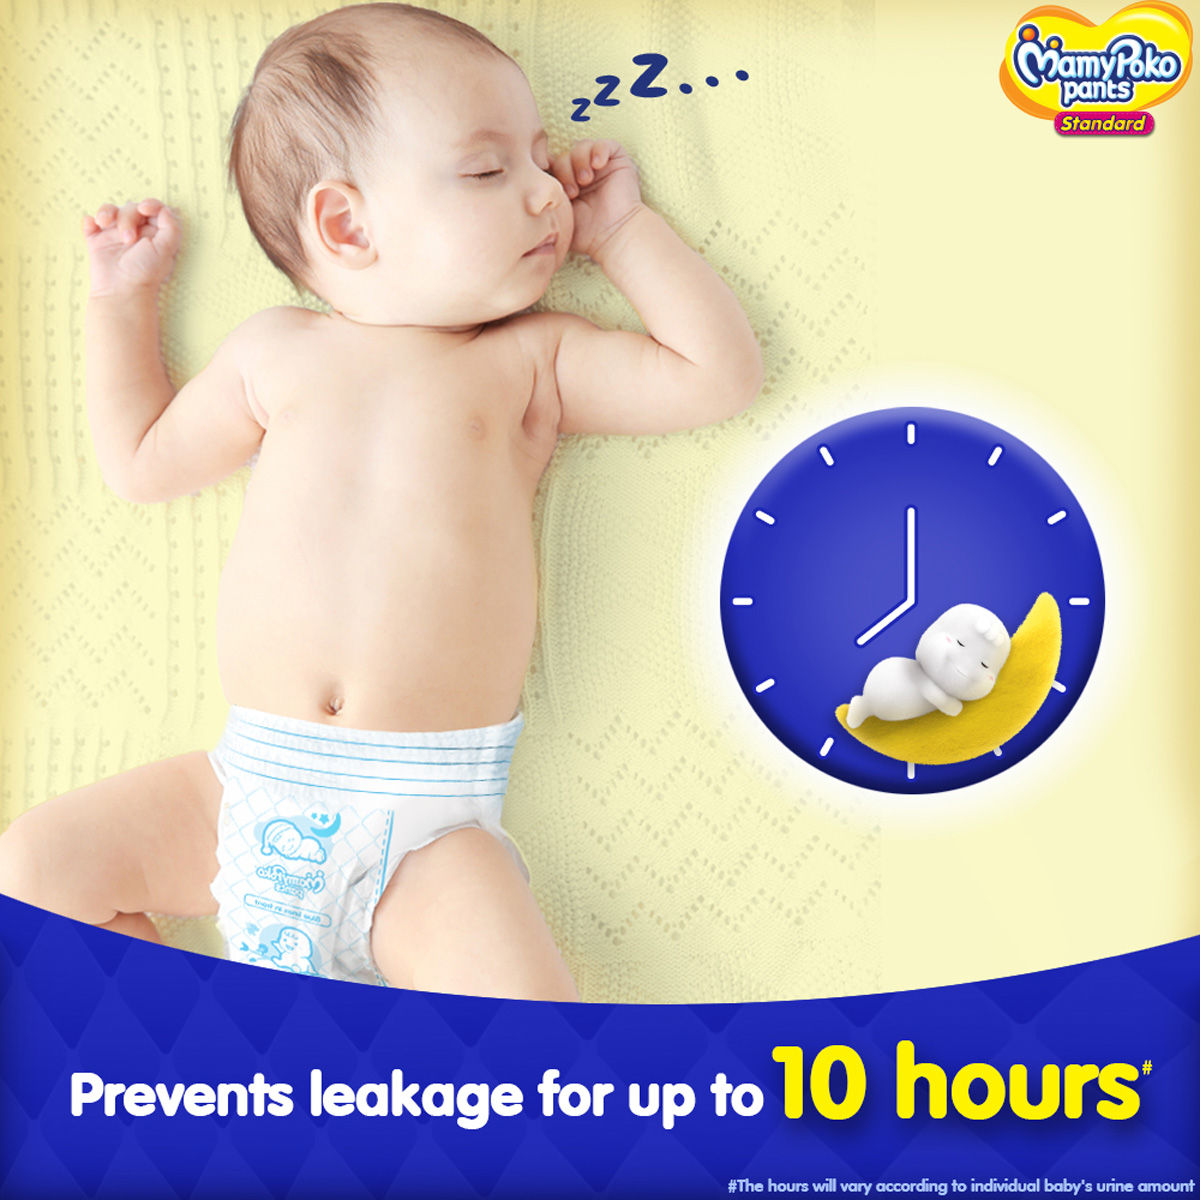 Buy MamyPoko Pants Extra Absorb Baby Diapers, X-Large (XL), 42 Count, 12-17  kg Online at Low Prices in India - Amazon.in